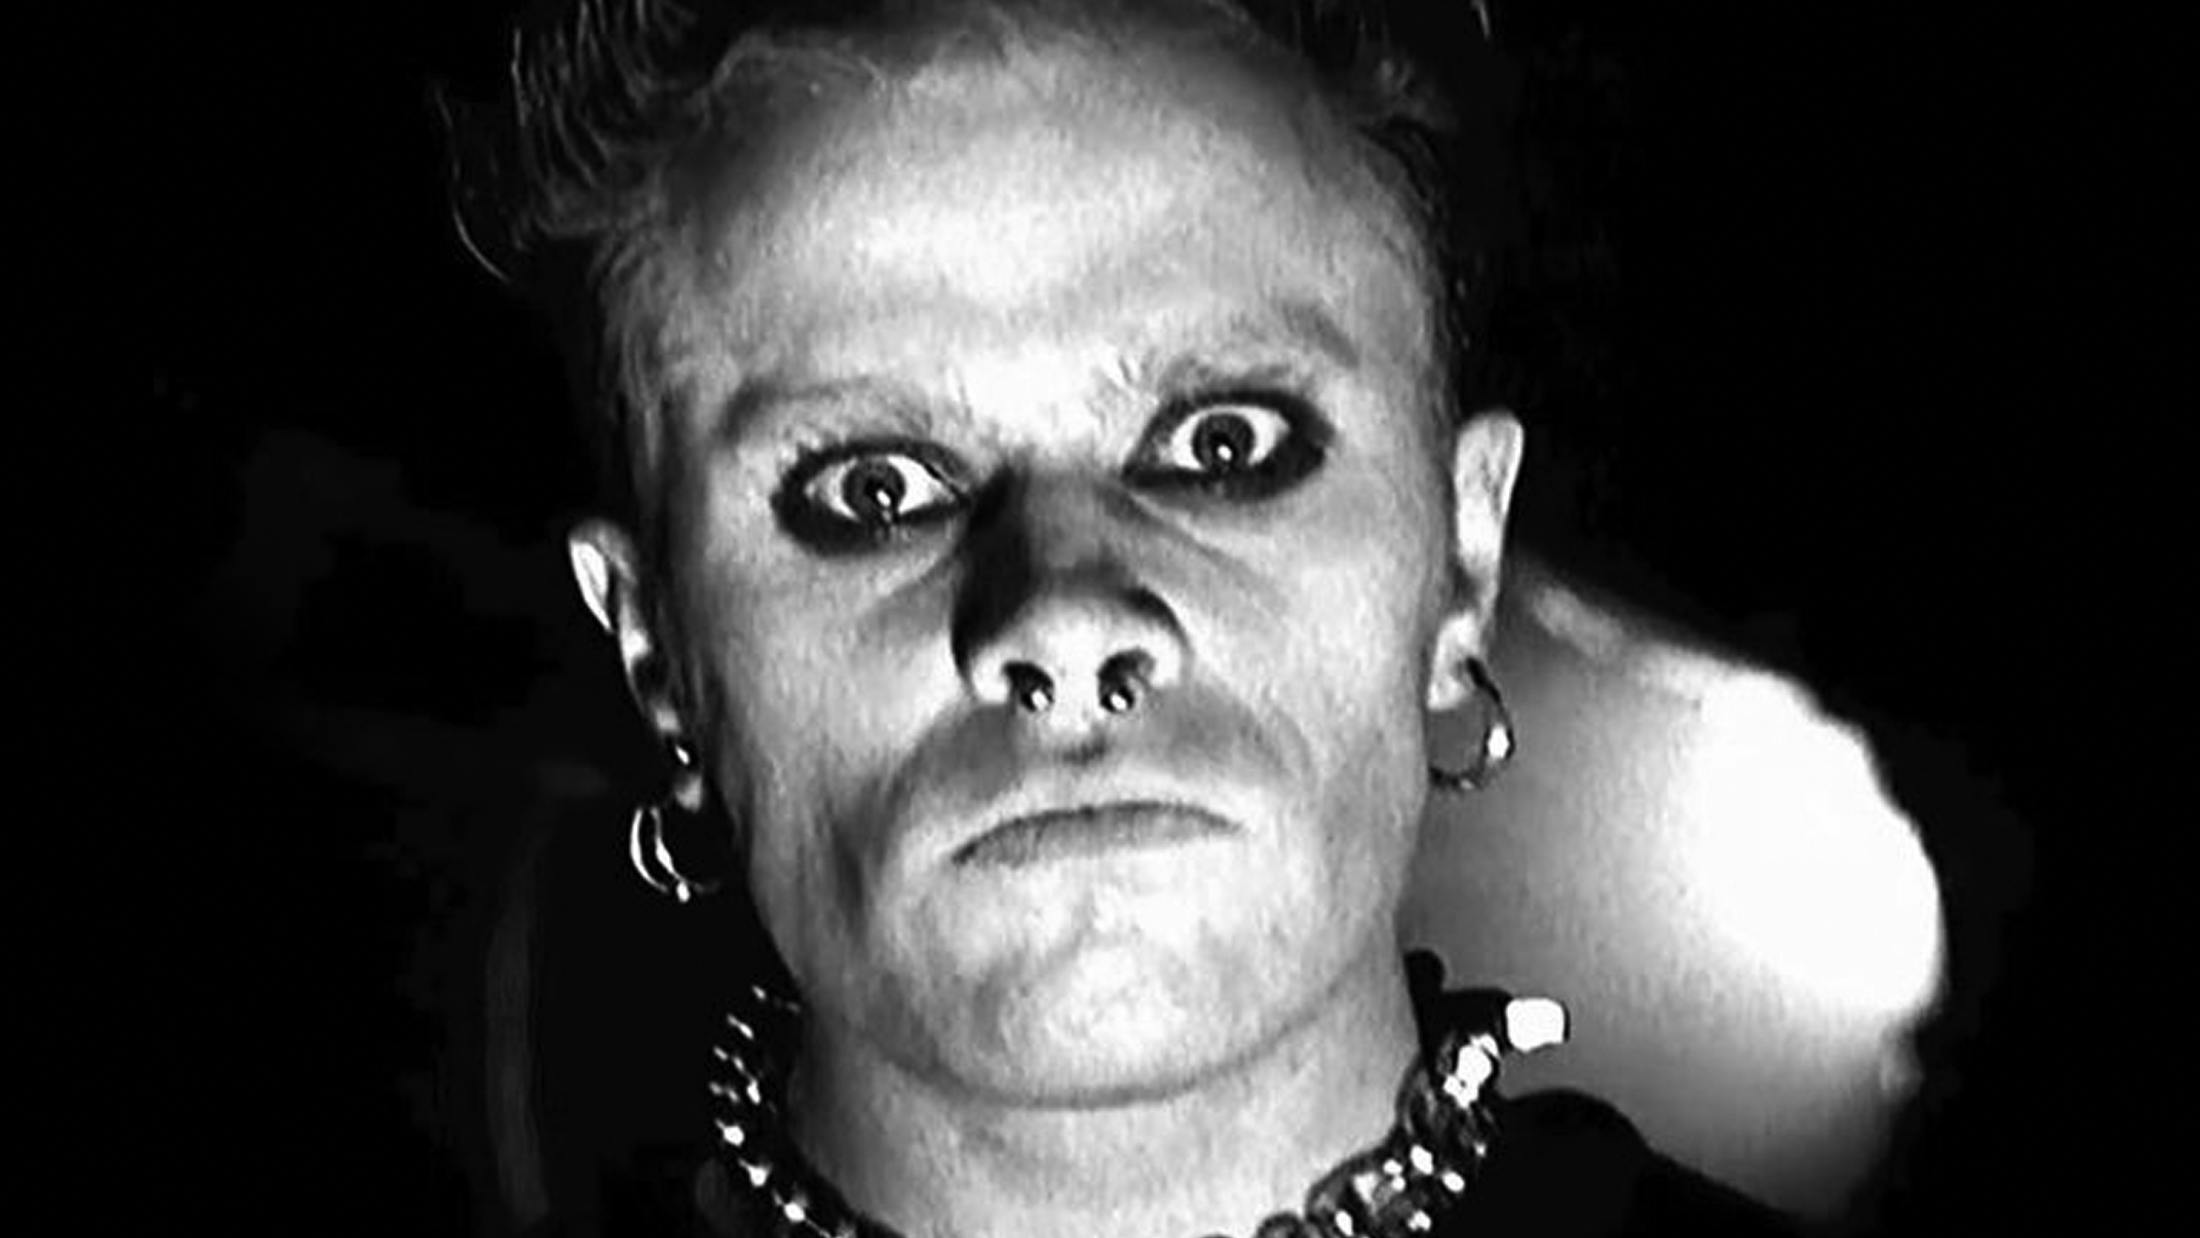 The Prodigy's Manager Pays Tribute To Keith Flint: "Witty, Charming, Pensive And Mercurial"